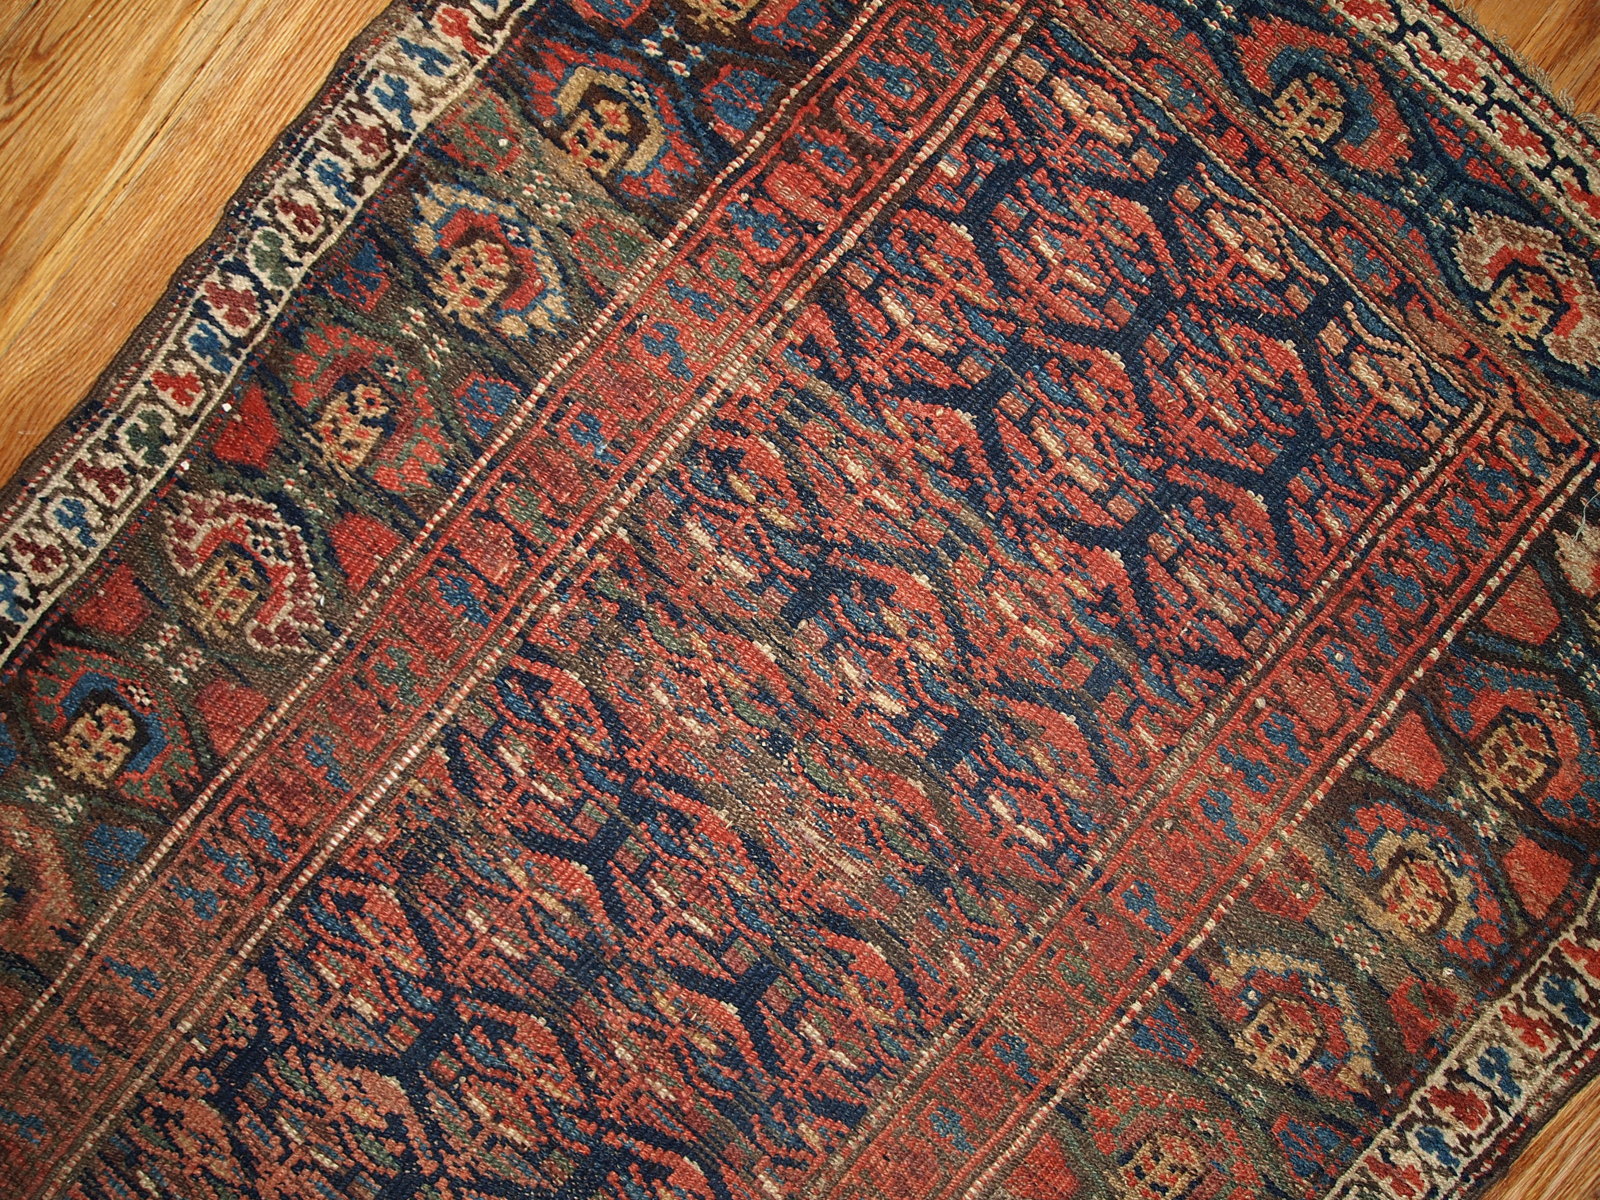 Antique hand made Persian Kurdish runner in navy blue and red shades. The rug is from the beginning of 20th century in original good condition.